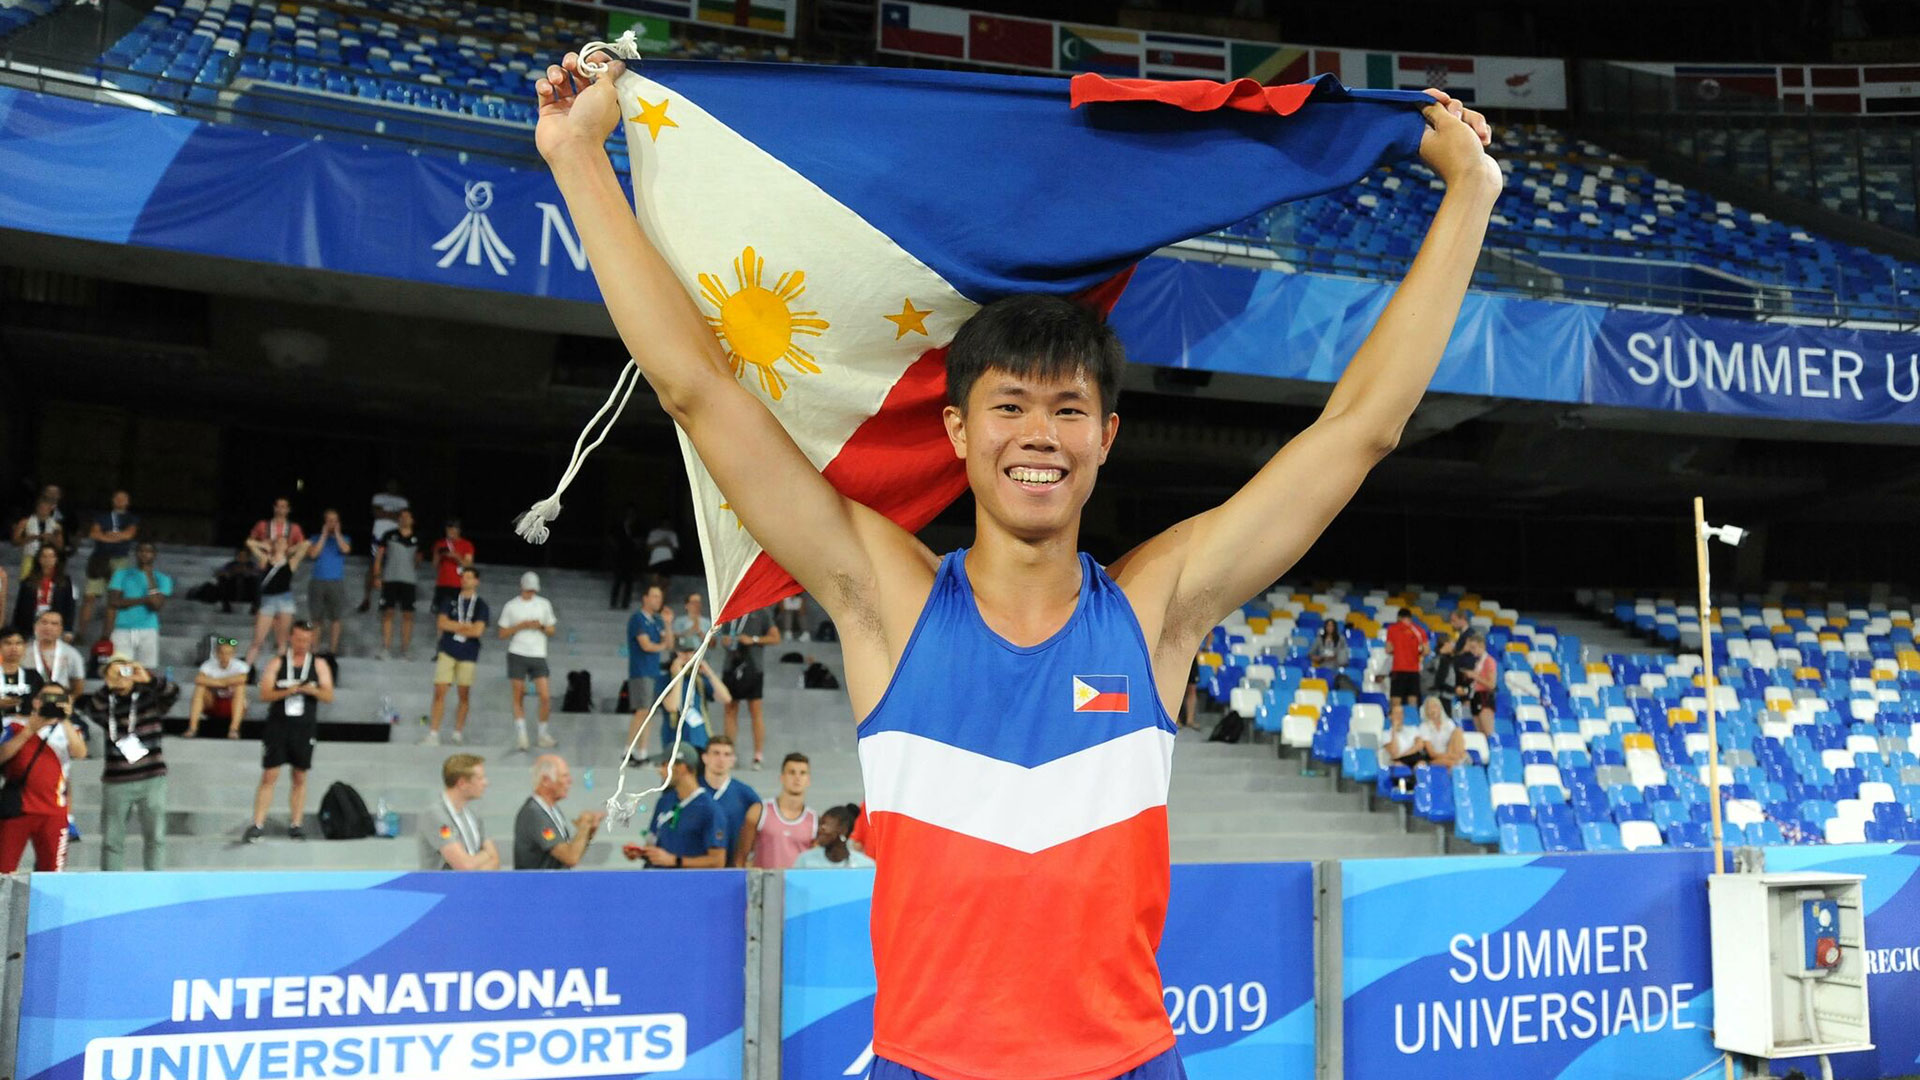 Philippine pole vault star Obiena prepared to fight expulsion by National Sports Association